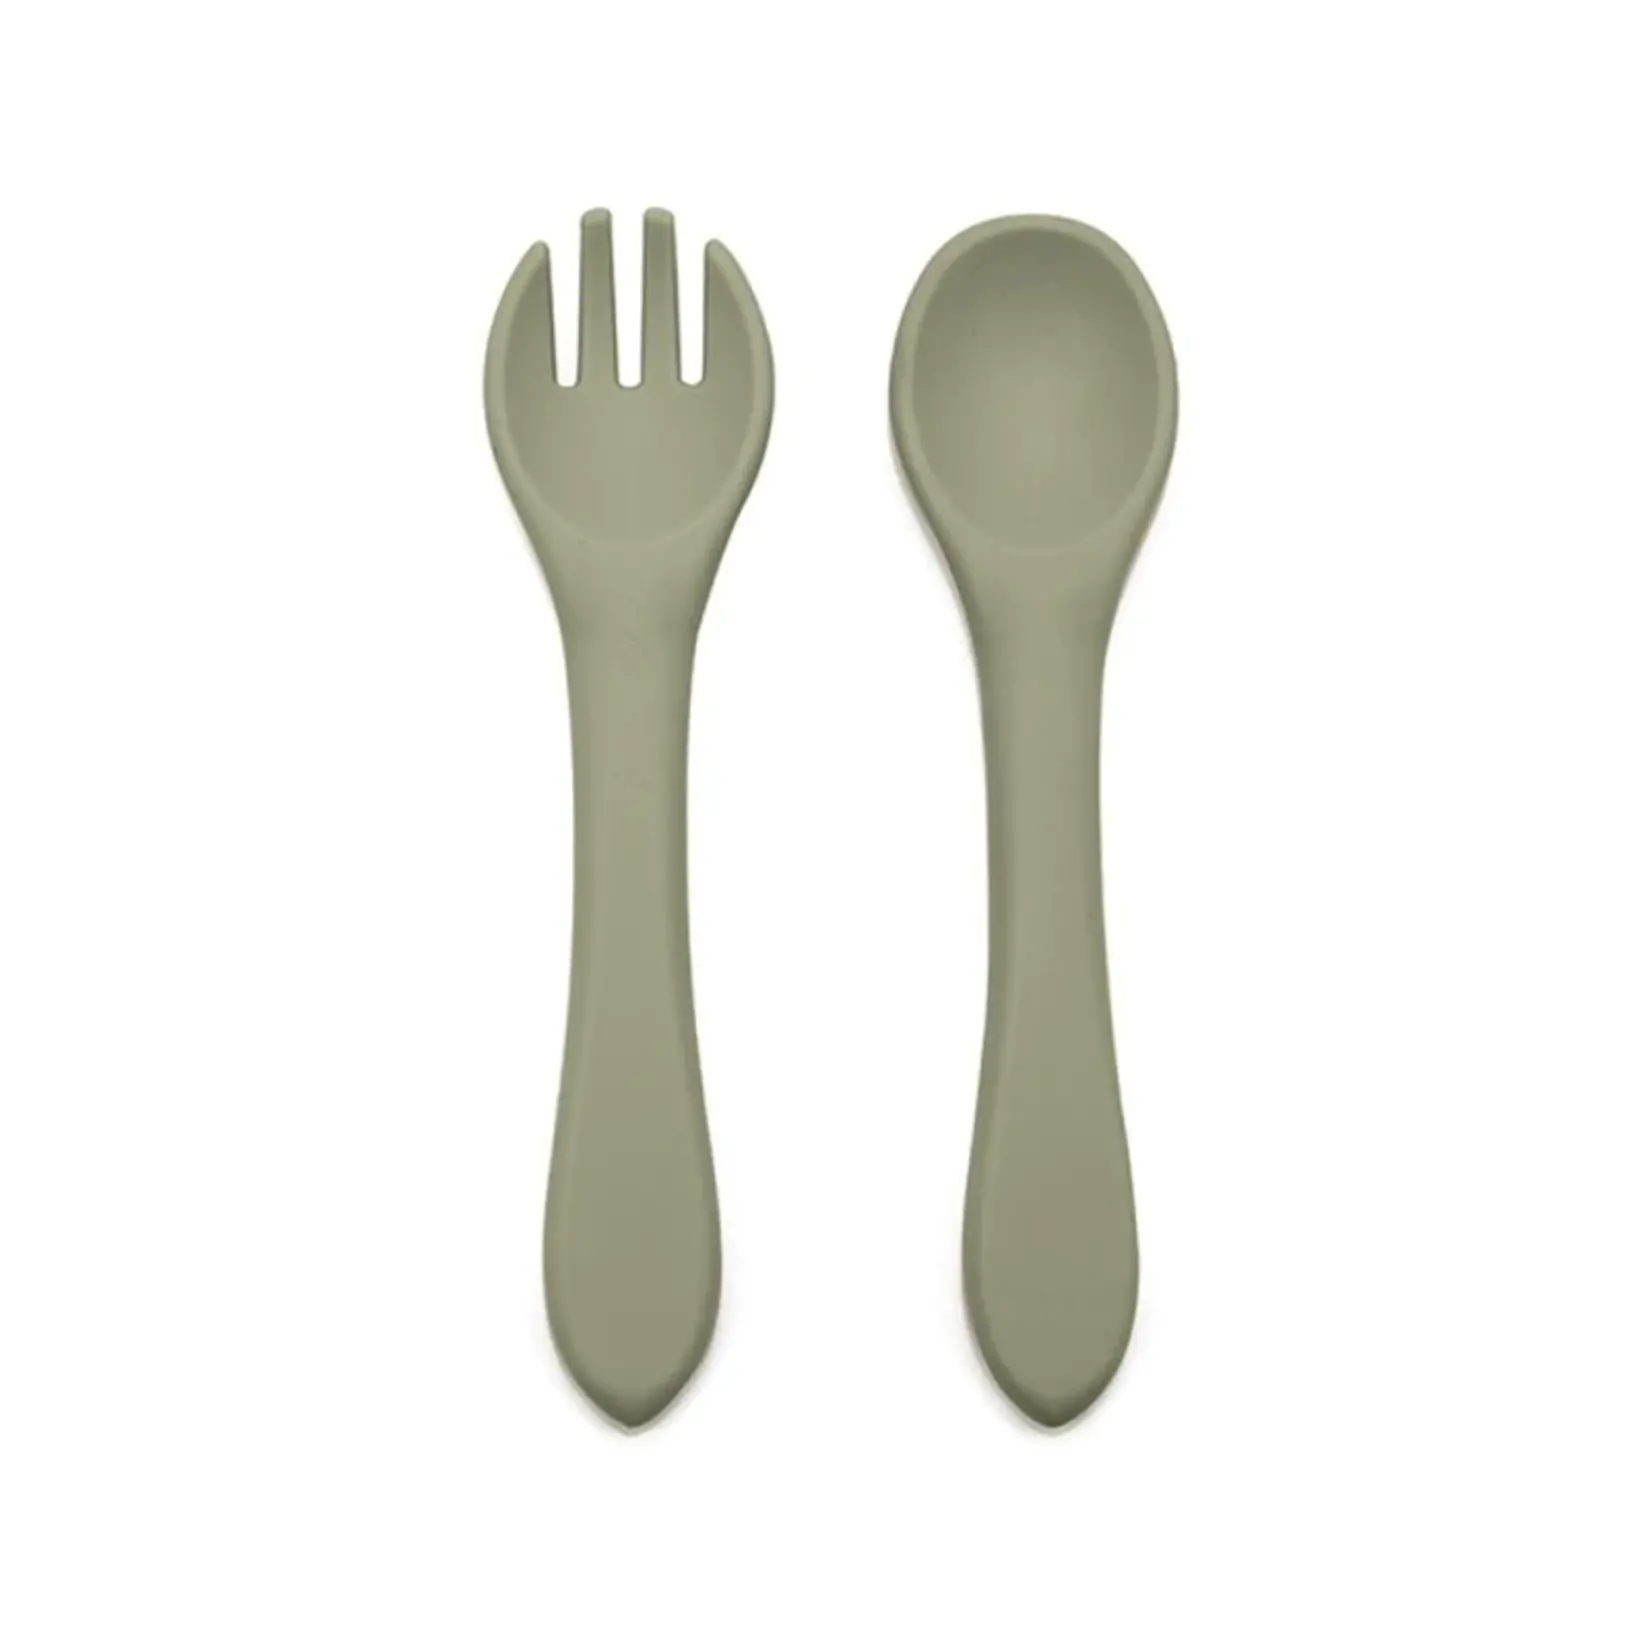 Tryco Tryco Silicone Spoon & fork set Olive grey